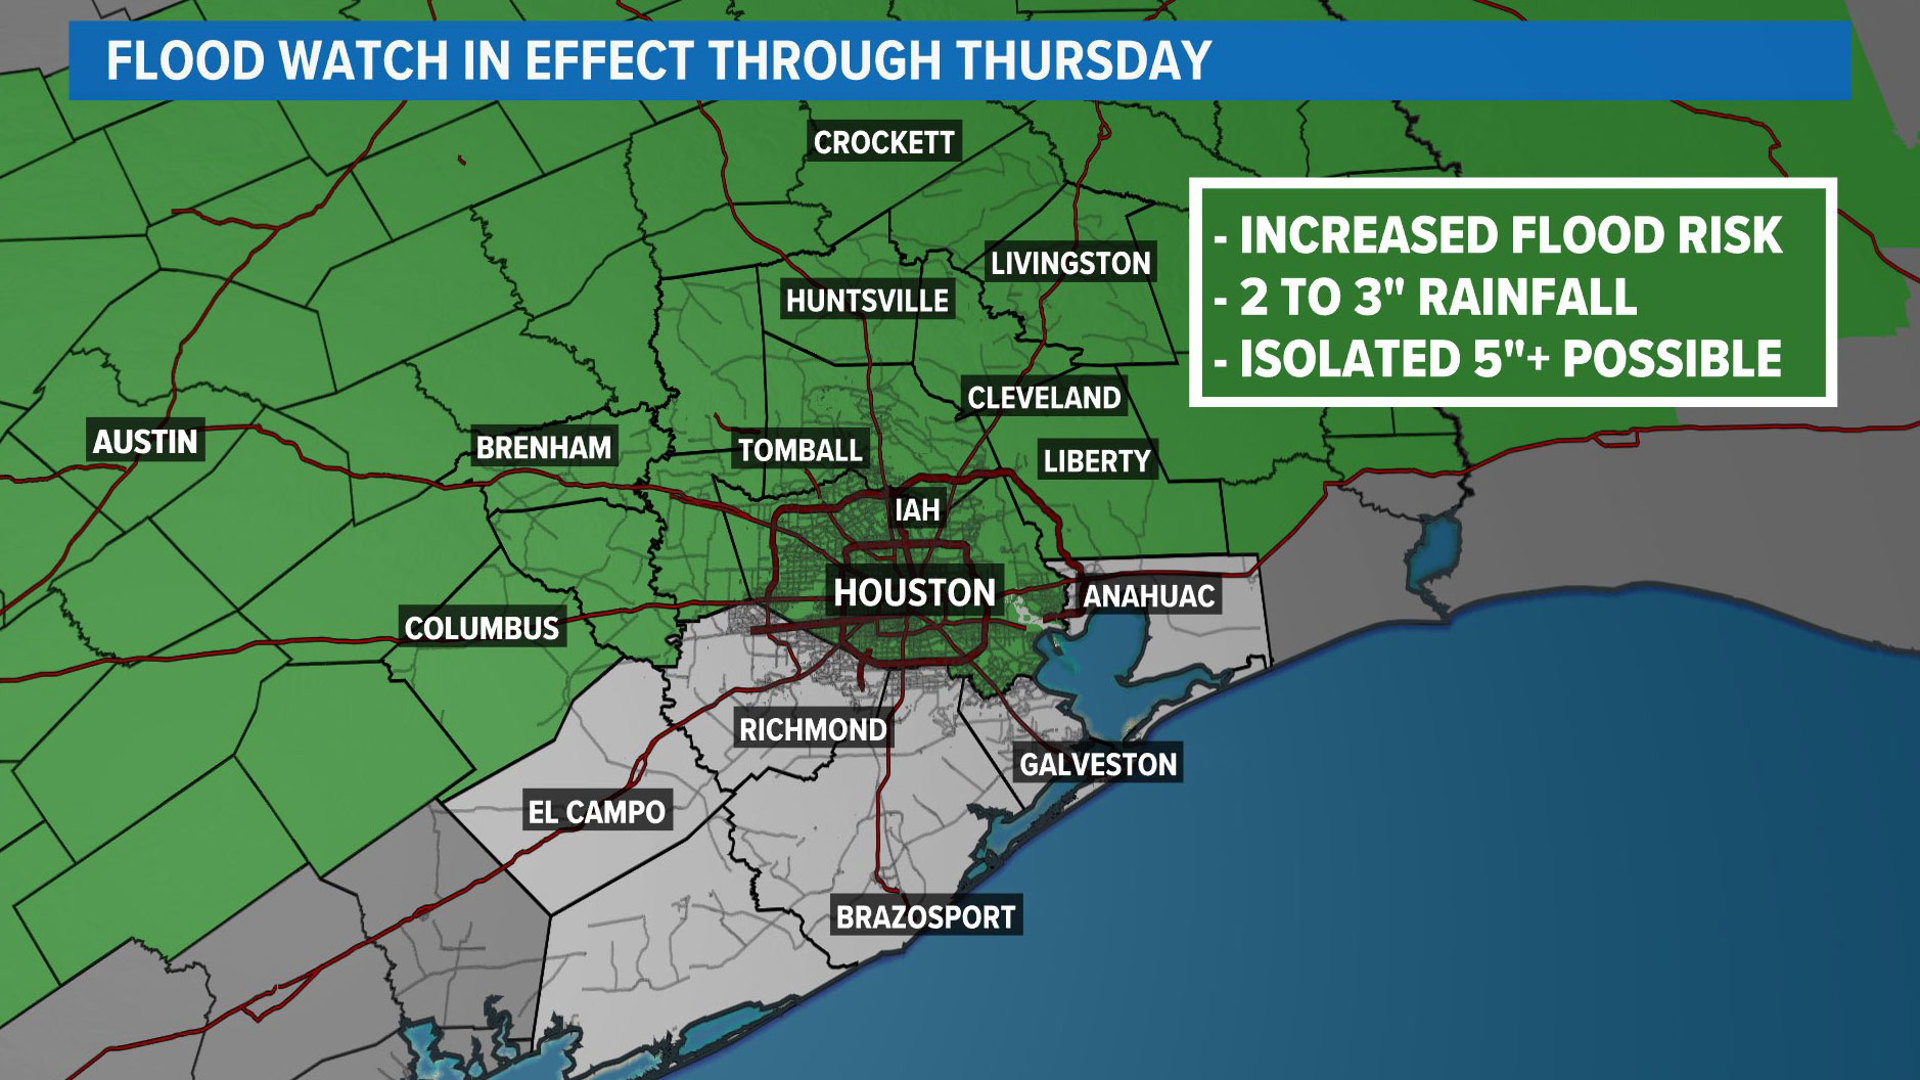 The northern counties are under a moderate risk for flooding. The heart of Harris County is under a slight risk.